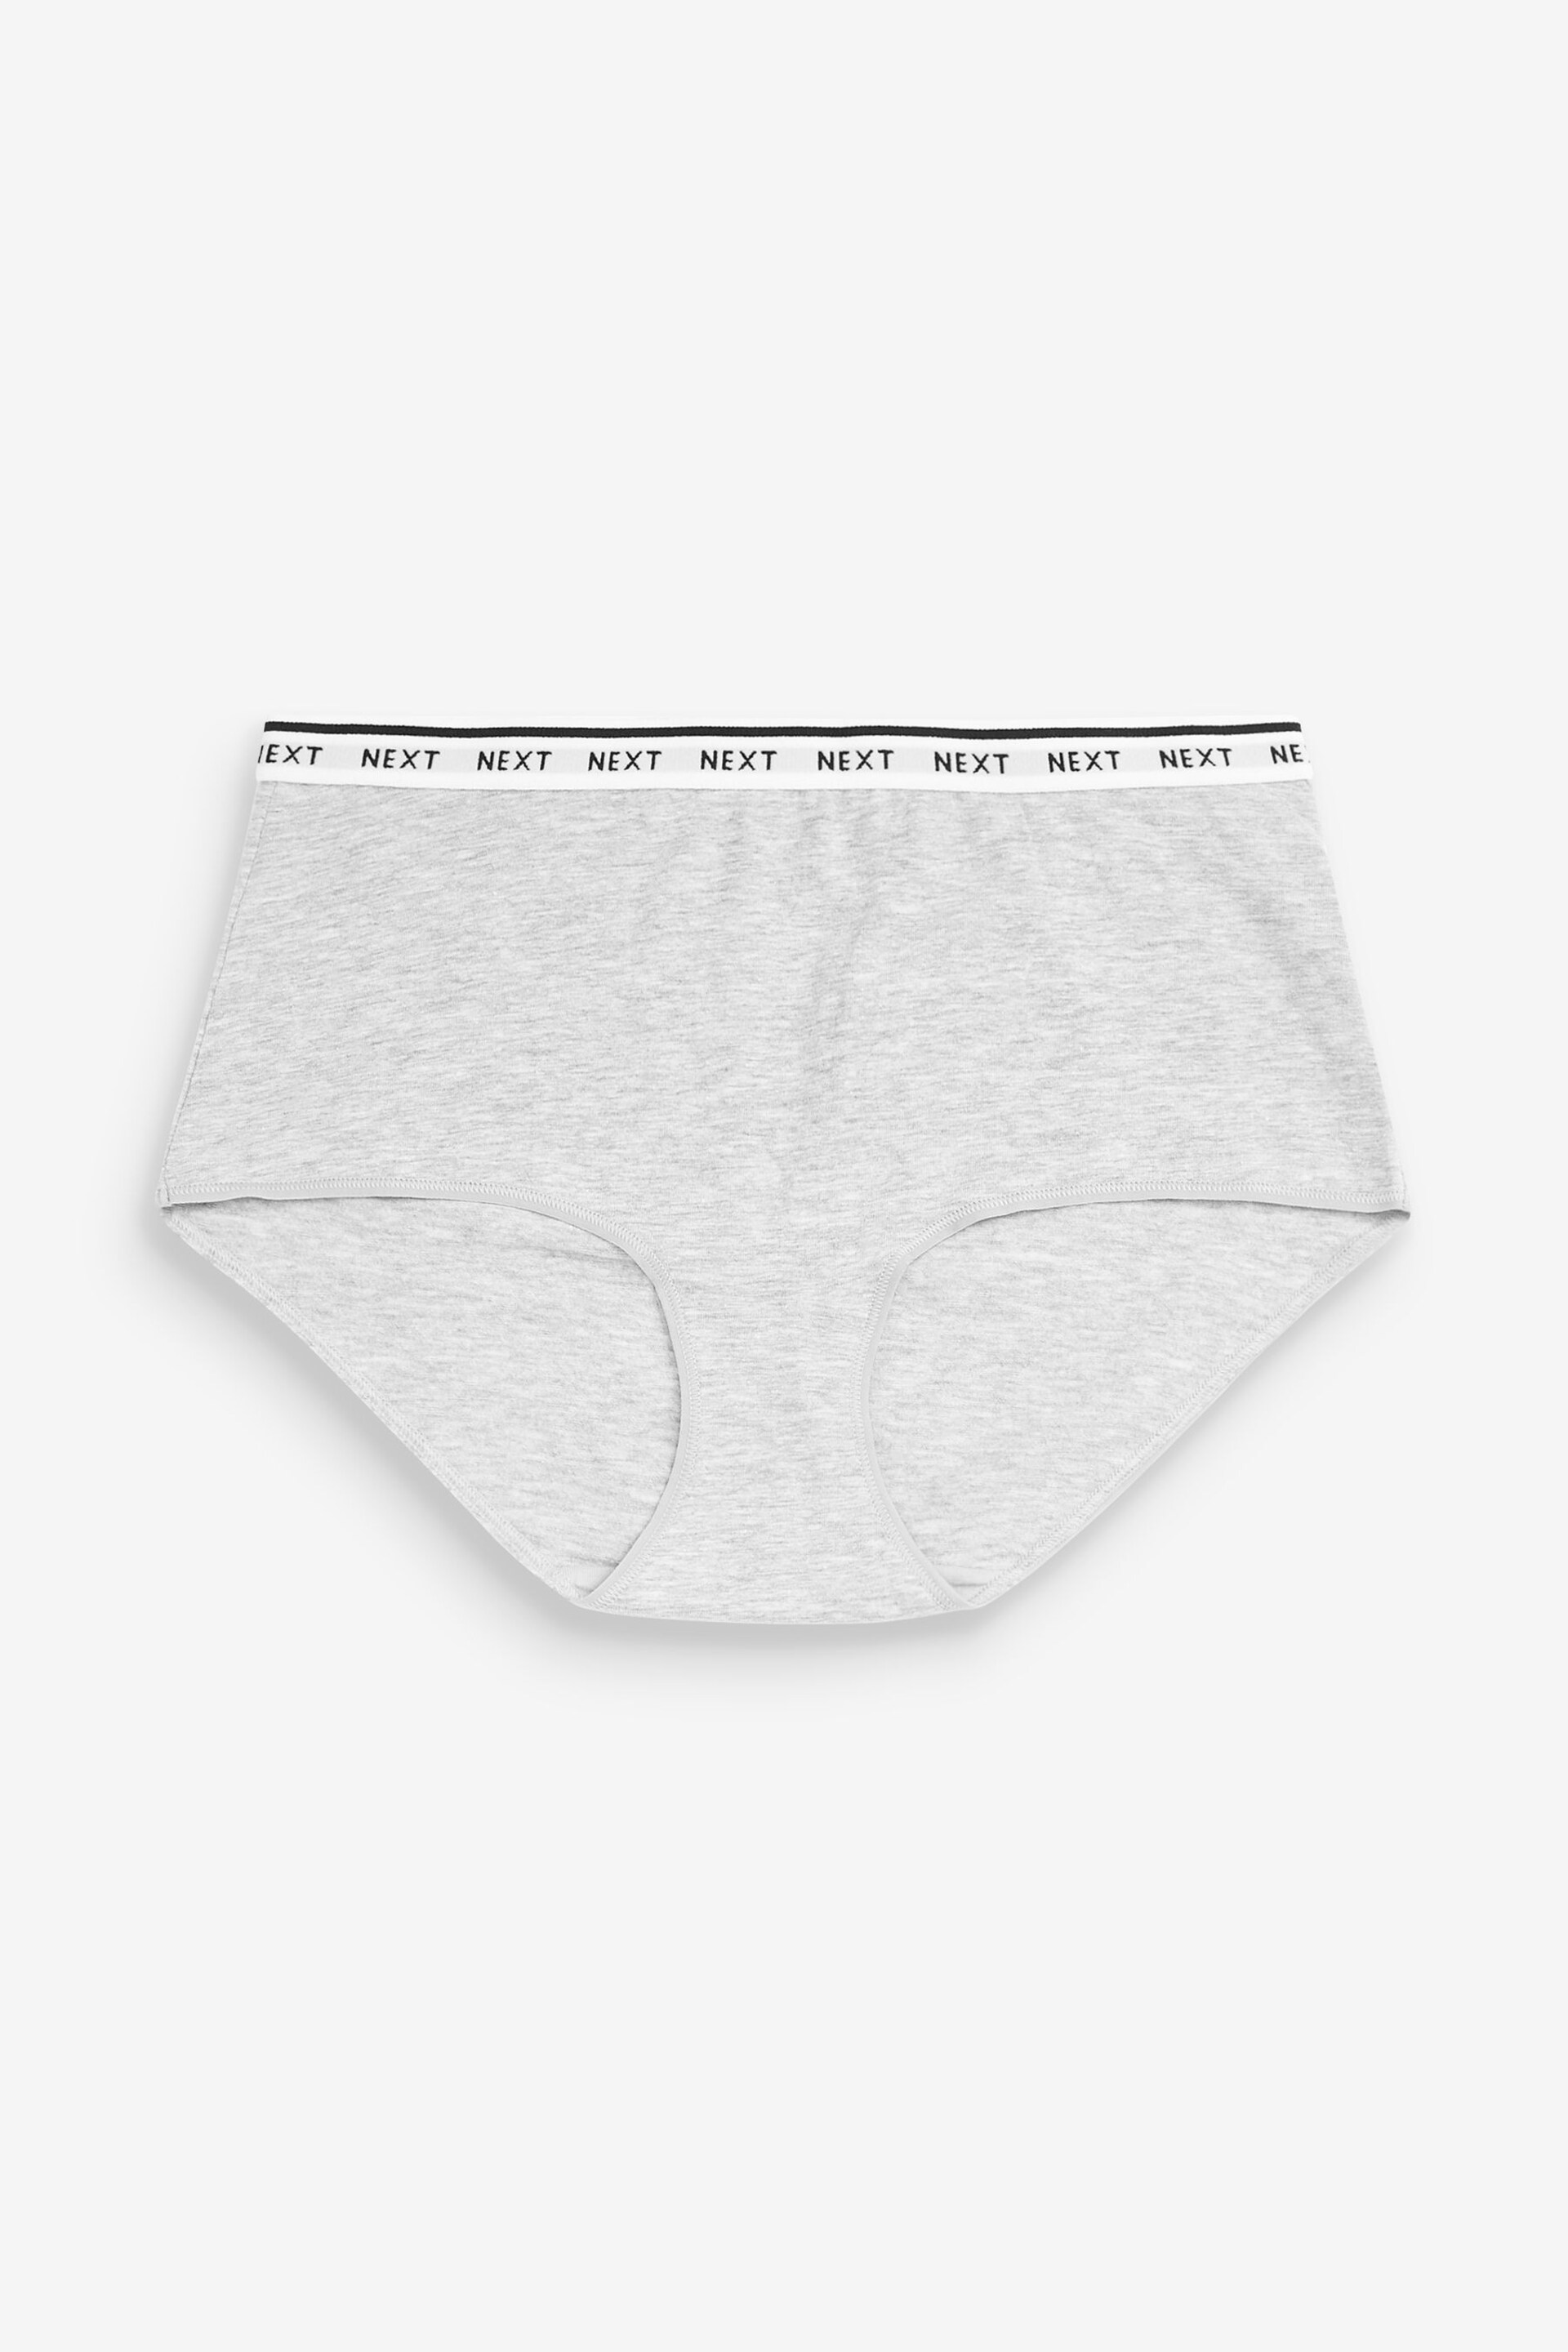 White/Black/Grey Midi Cotton Rich Logo Knickers 4 Pack - Image 8 of 8